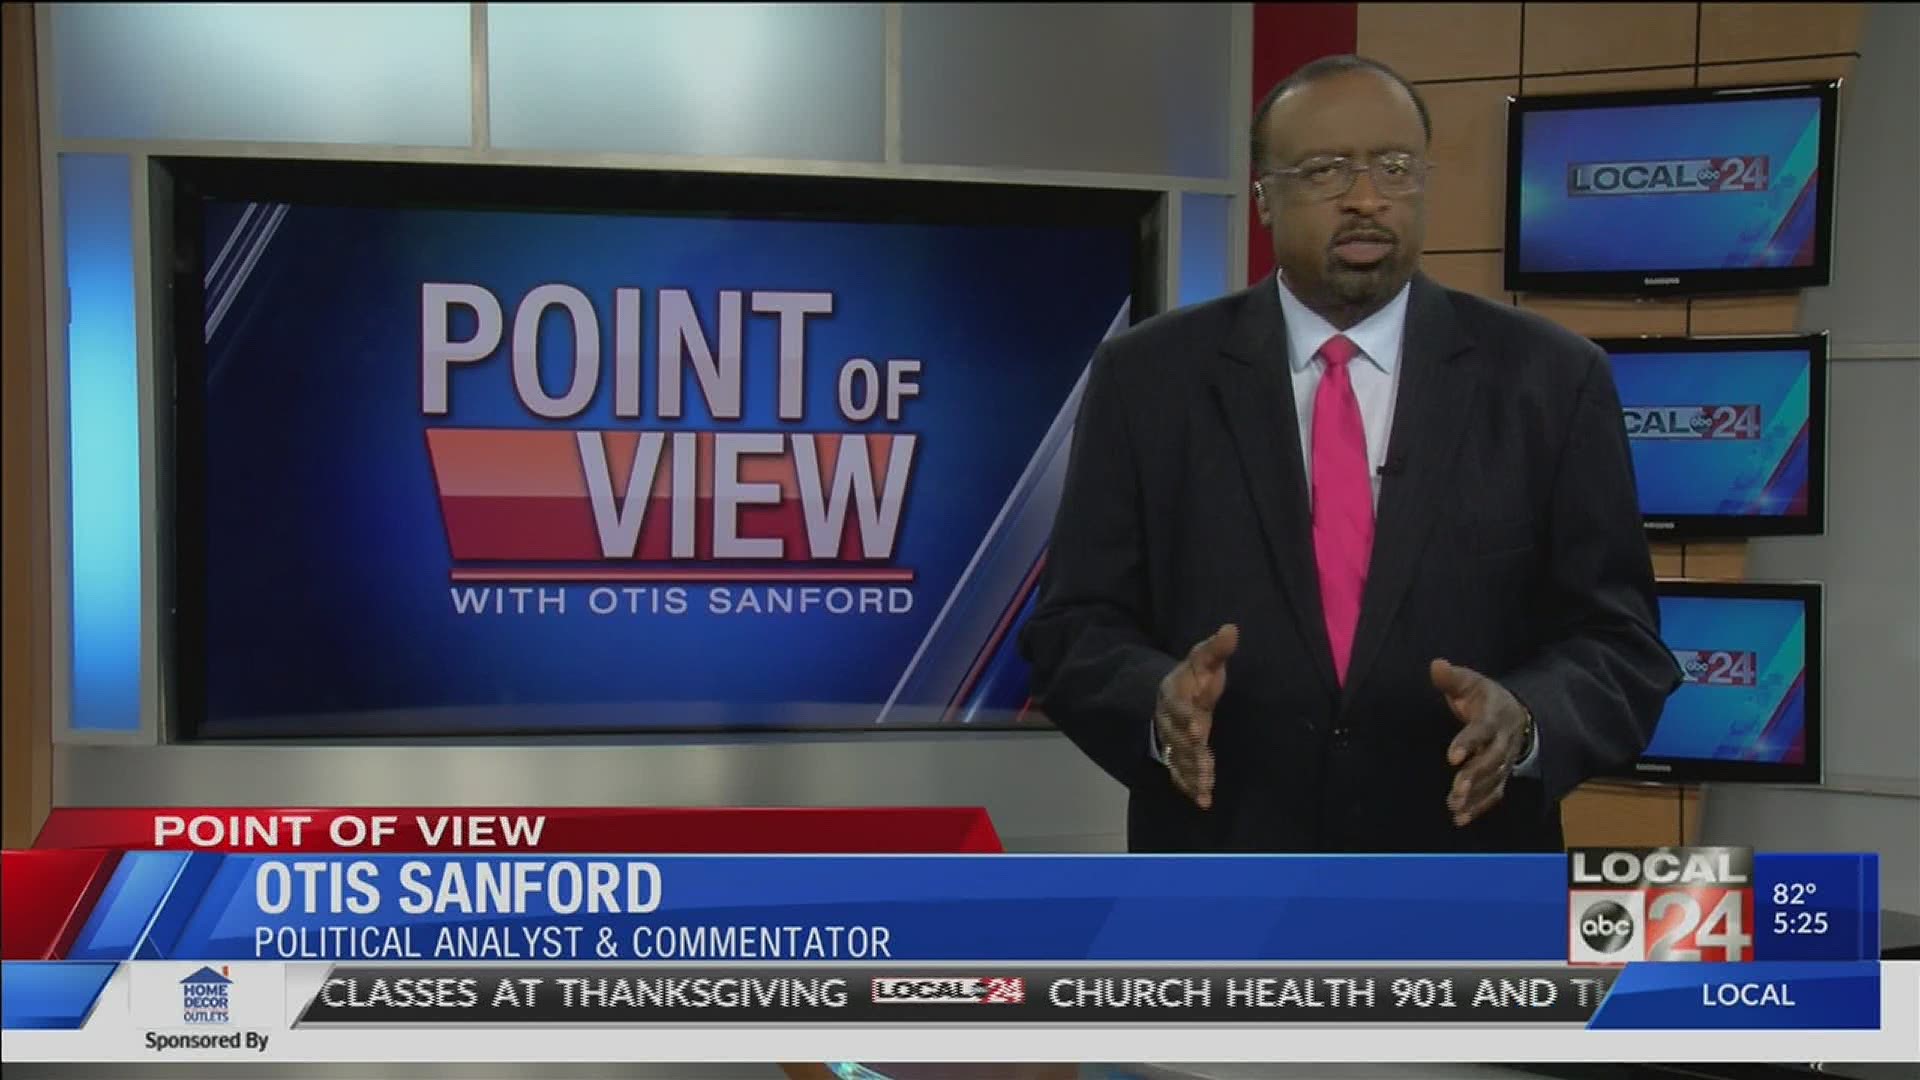 Local 24 News political analyst and commentator Otis Sanford shares his point of view on protests over George Floyd’s death.